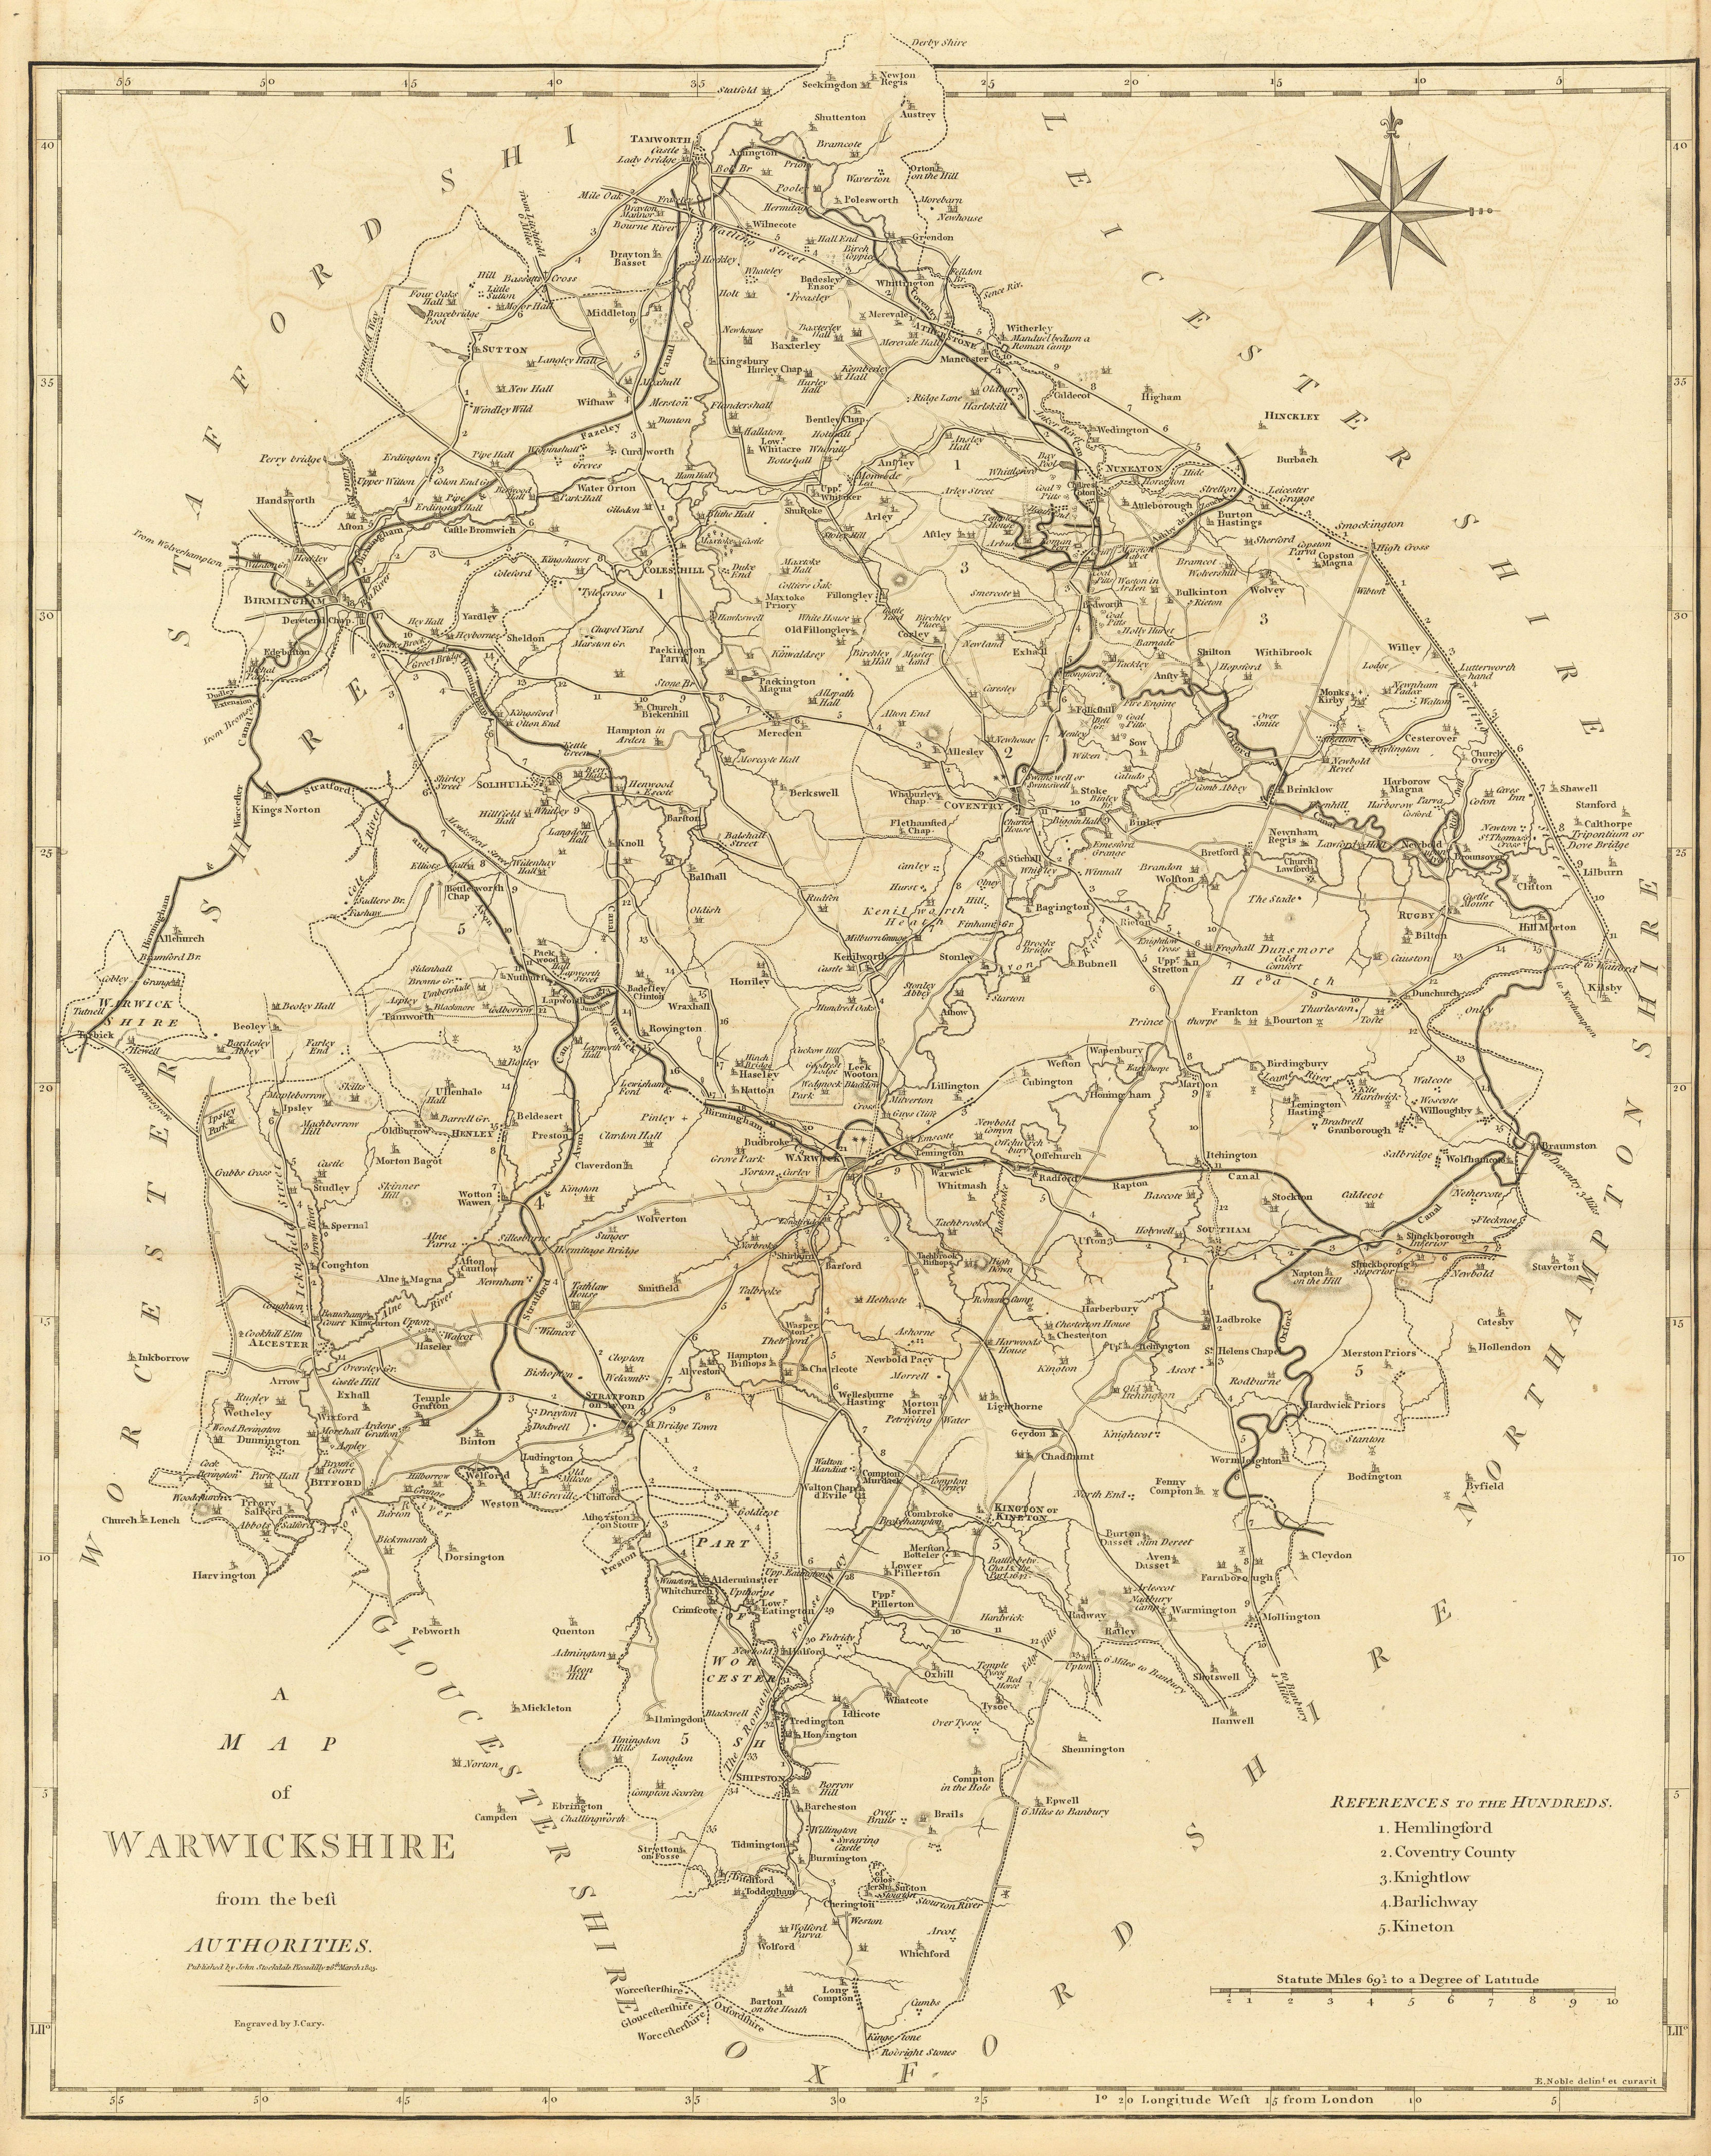 "A map of Warwickshire from the best authorities". County map. CARY 1806